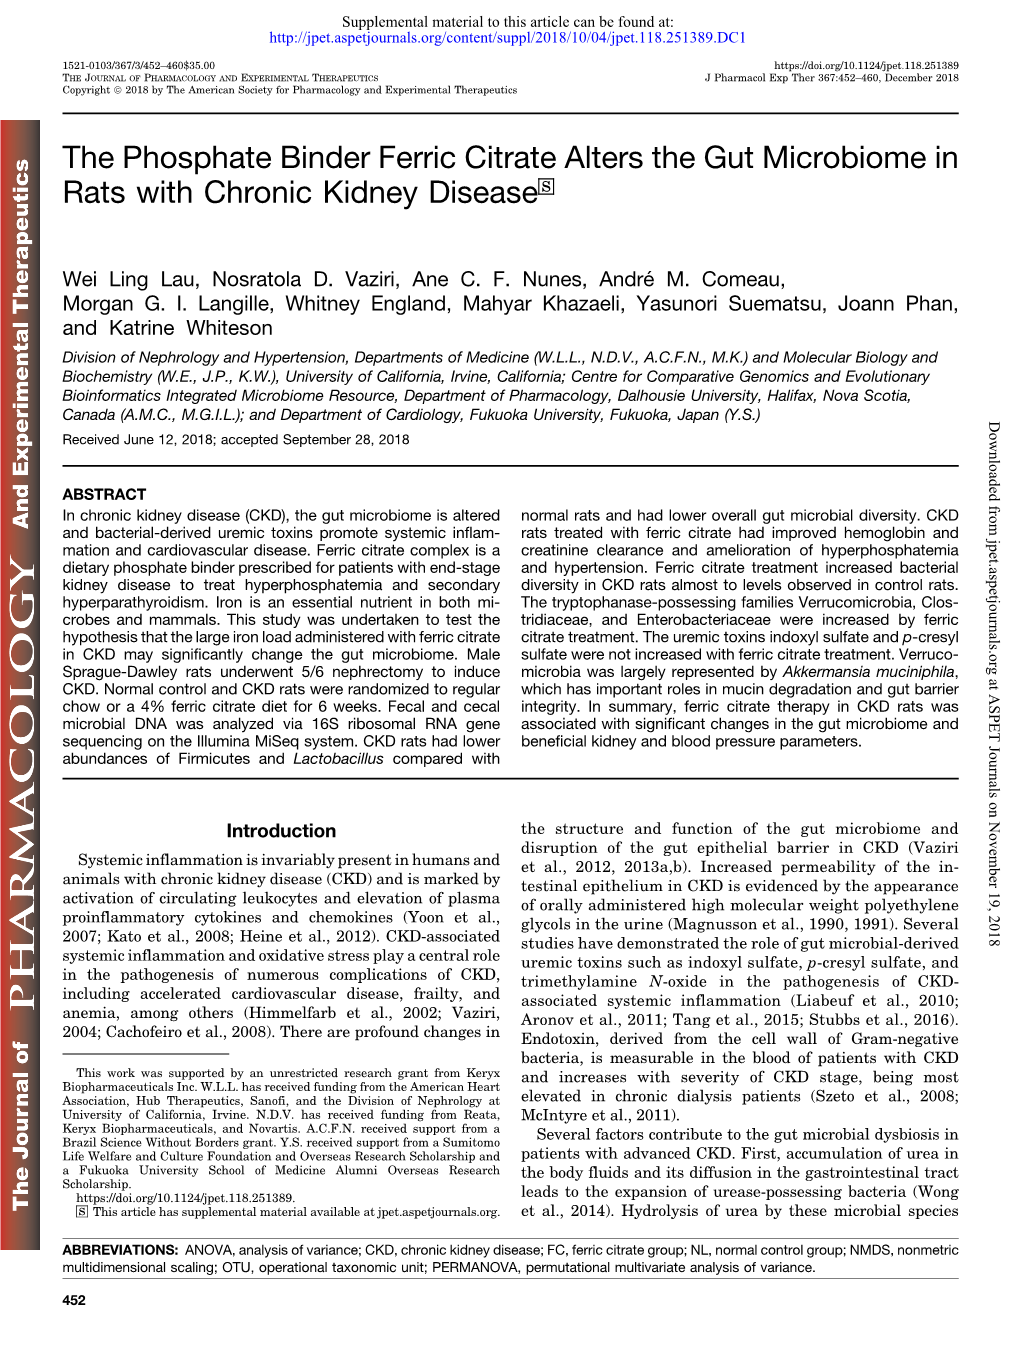 The Phosphate Binder Ferric Citrate Alters the Gut Microbiome in Rats with Chronic Kidney Disease S